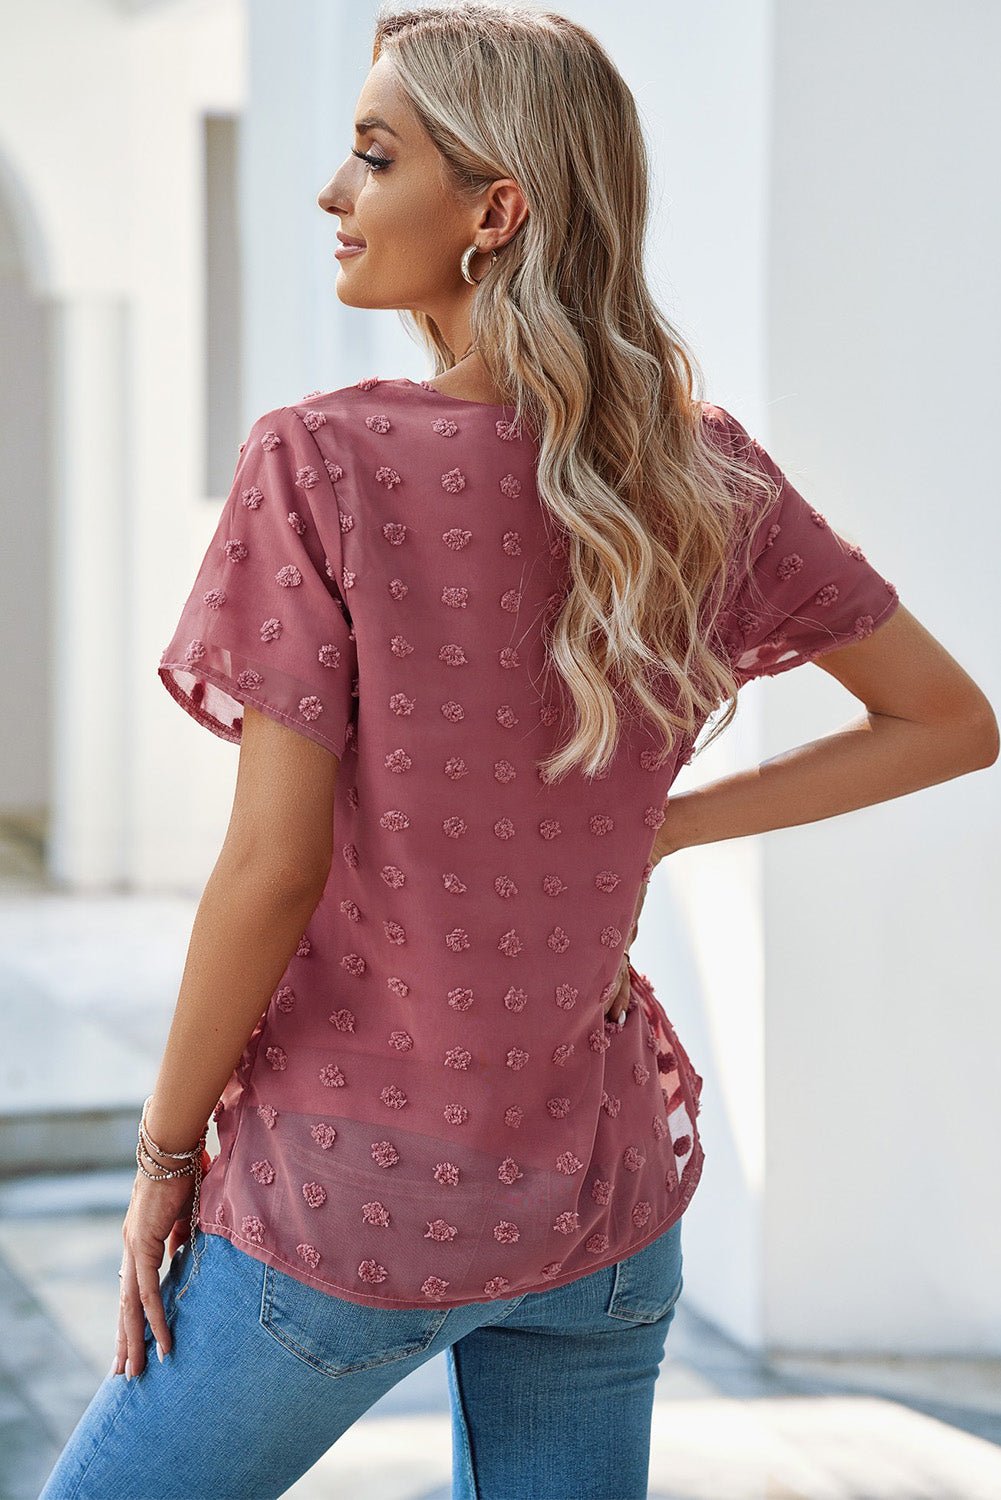 Polka Dot Sheer Blouse - mauve blouse with polka dots that has short sleeves and a round neck. #Firefly Lane Boutique1